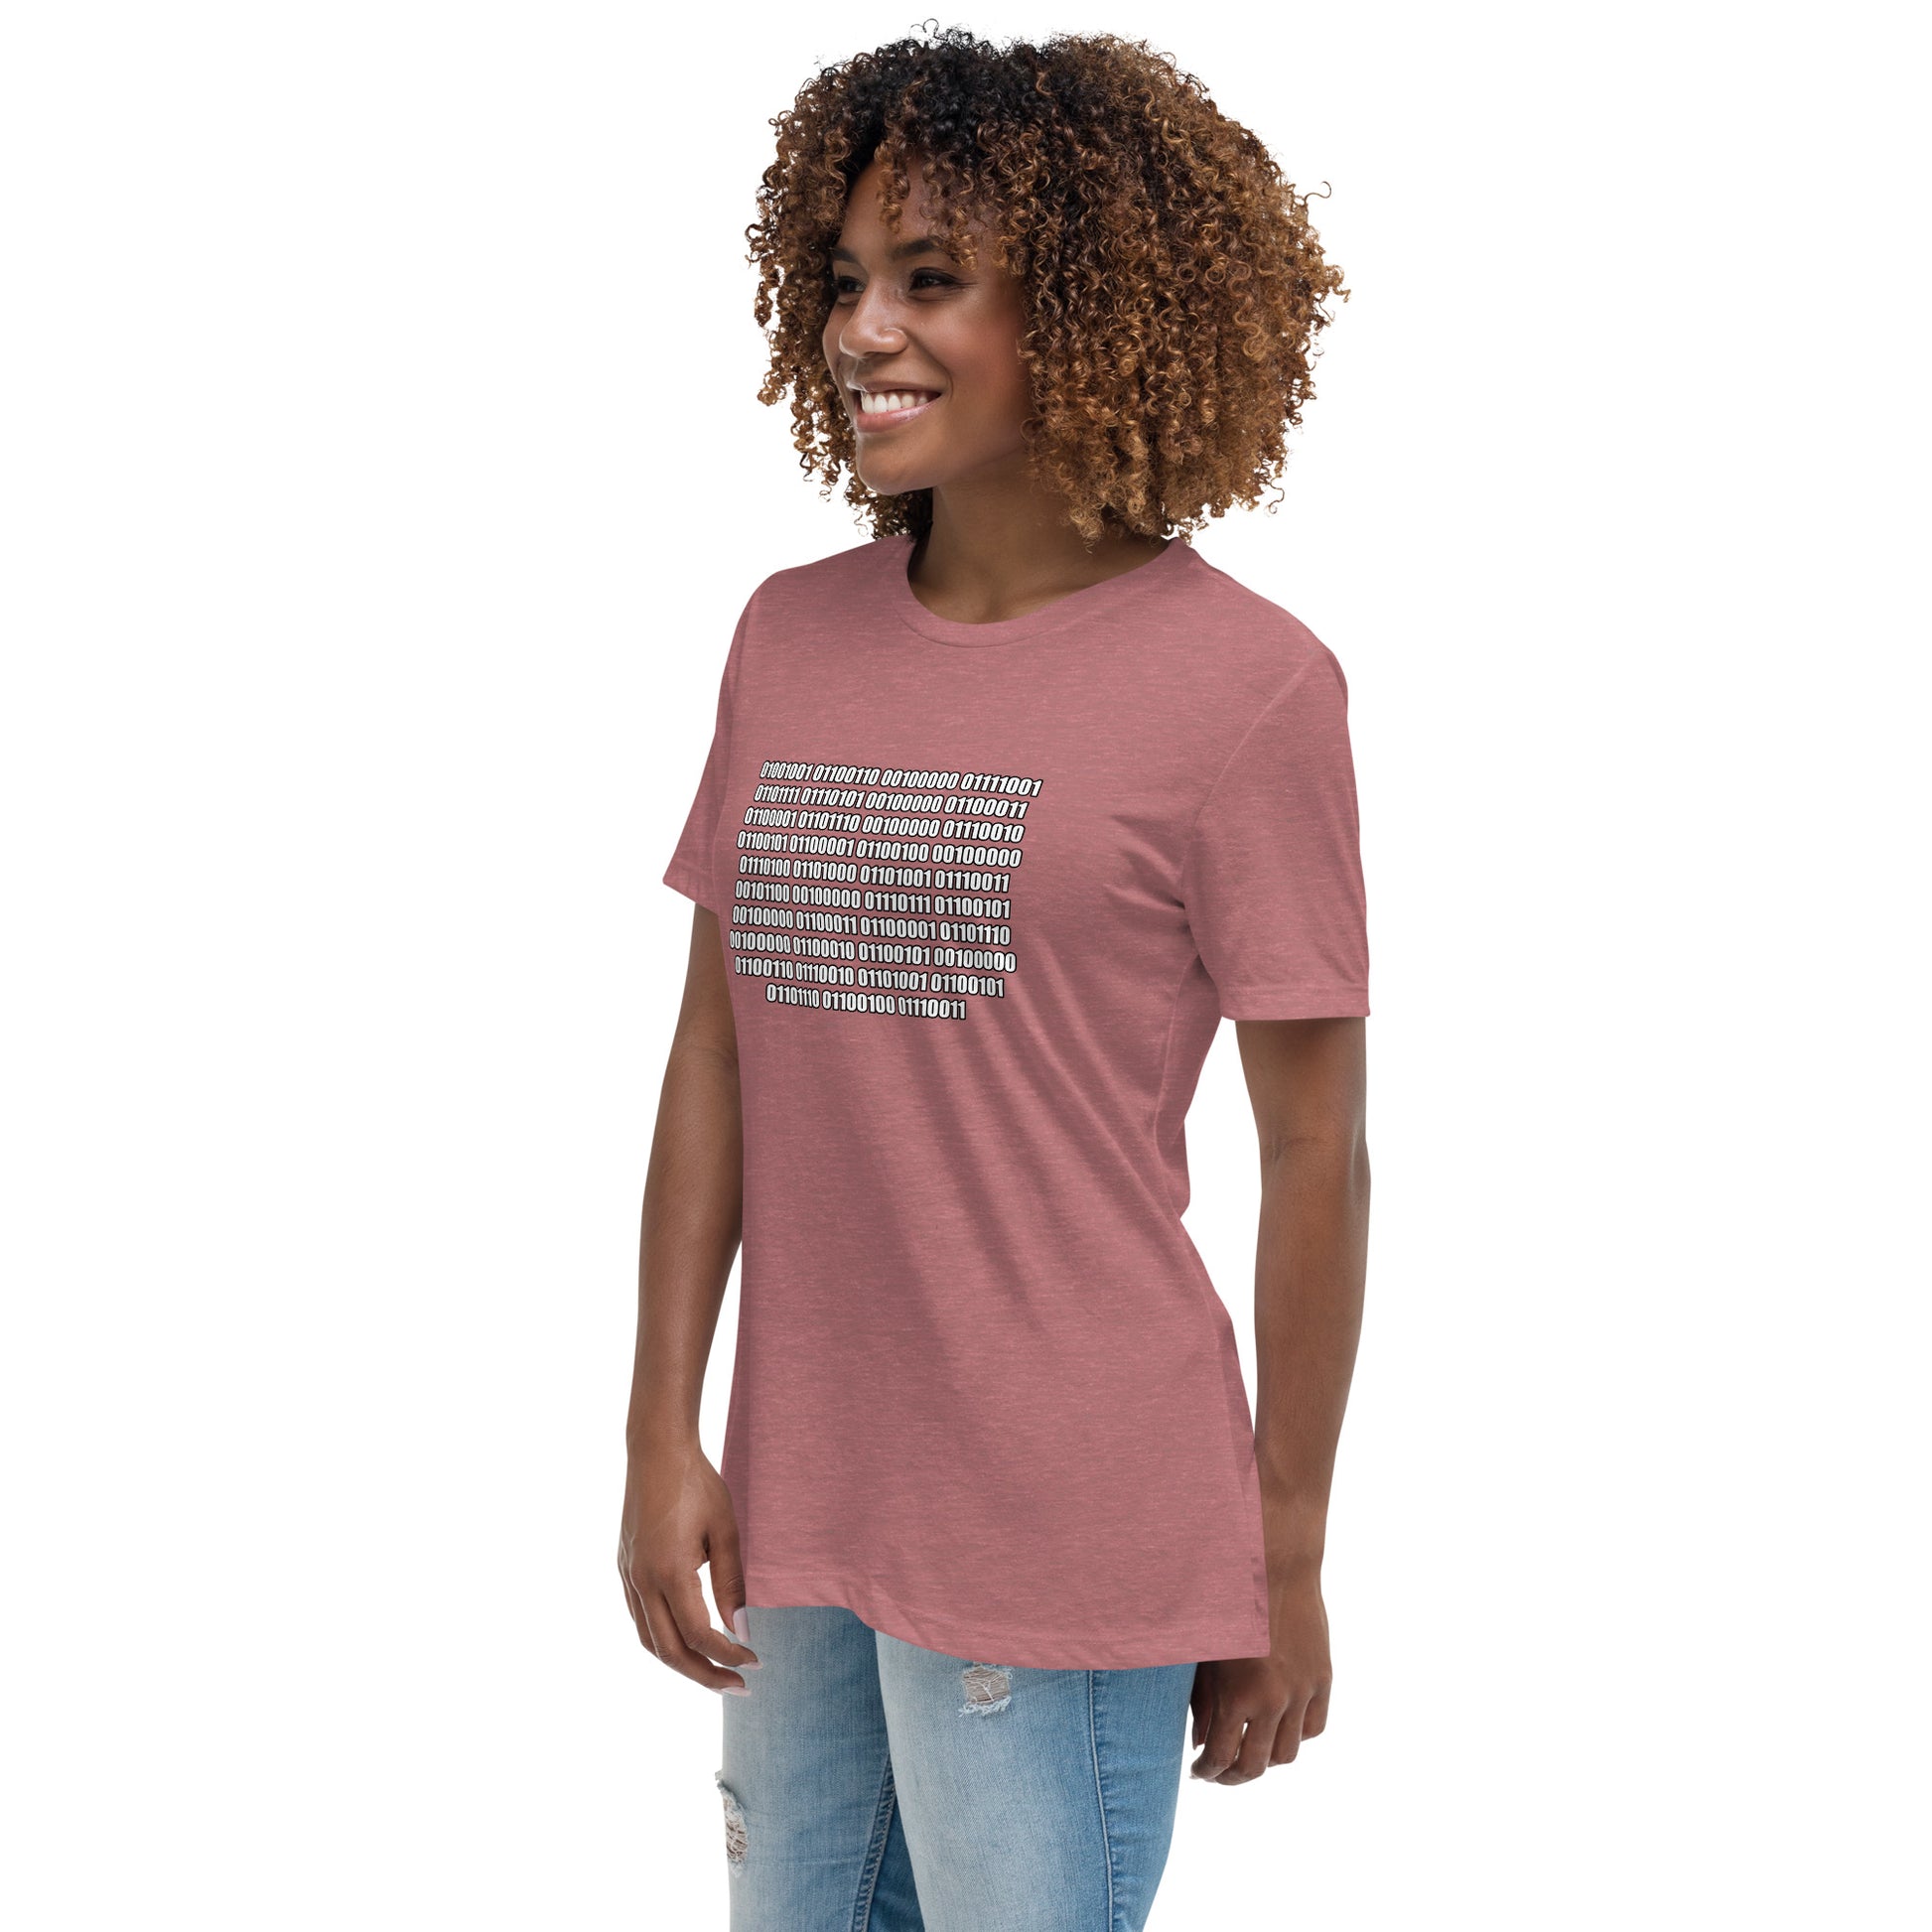 Woman with mauve t-shirt with binary code "If you can read this"